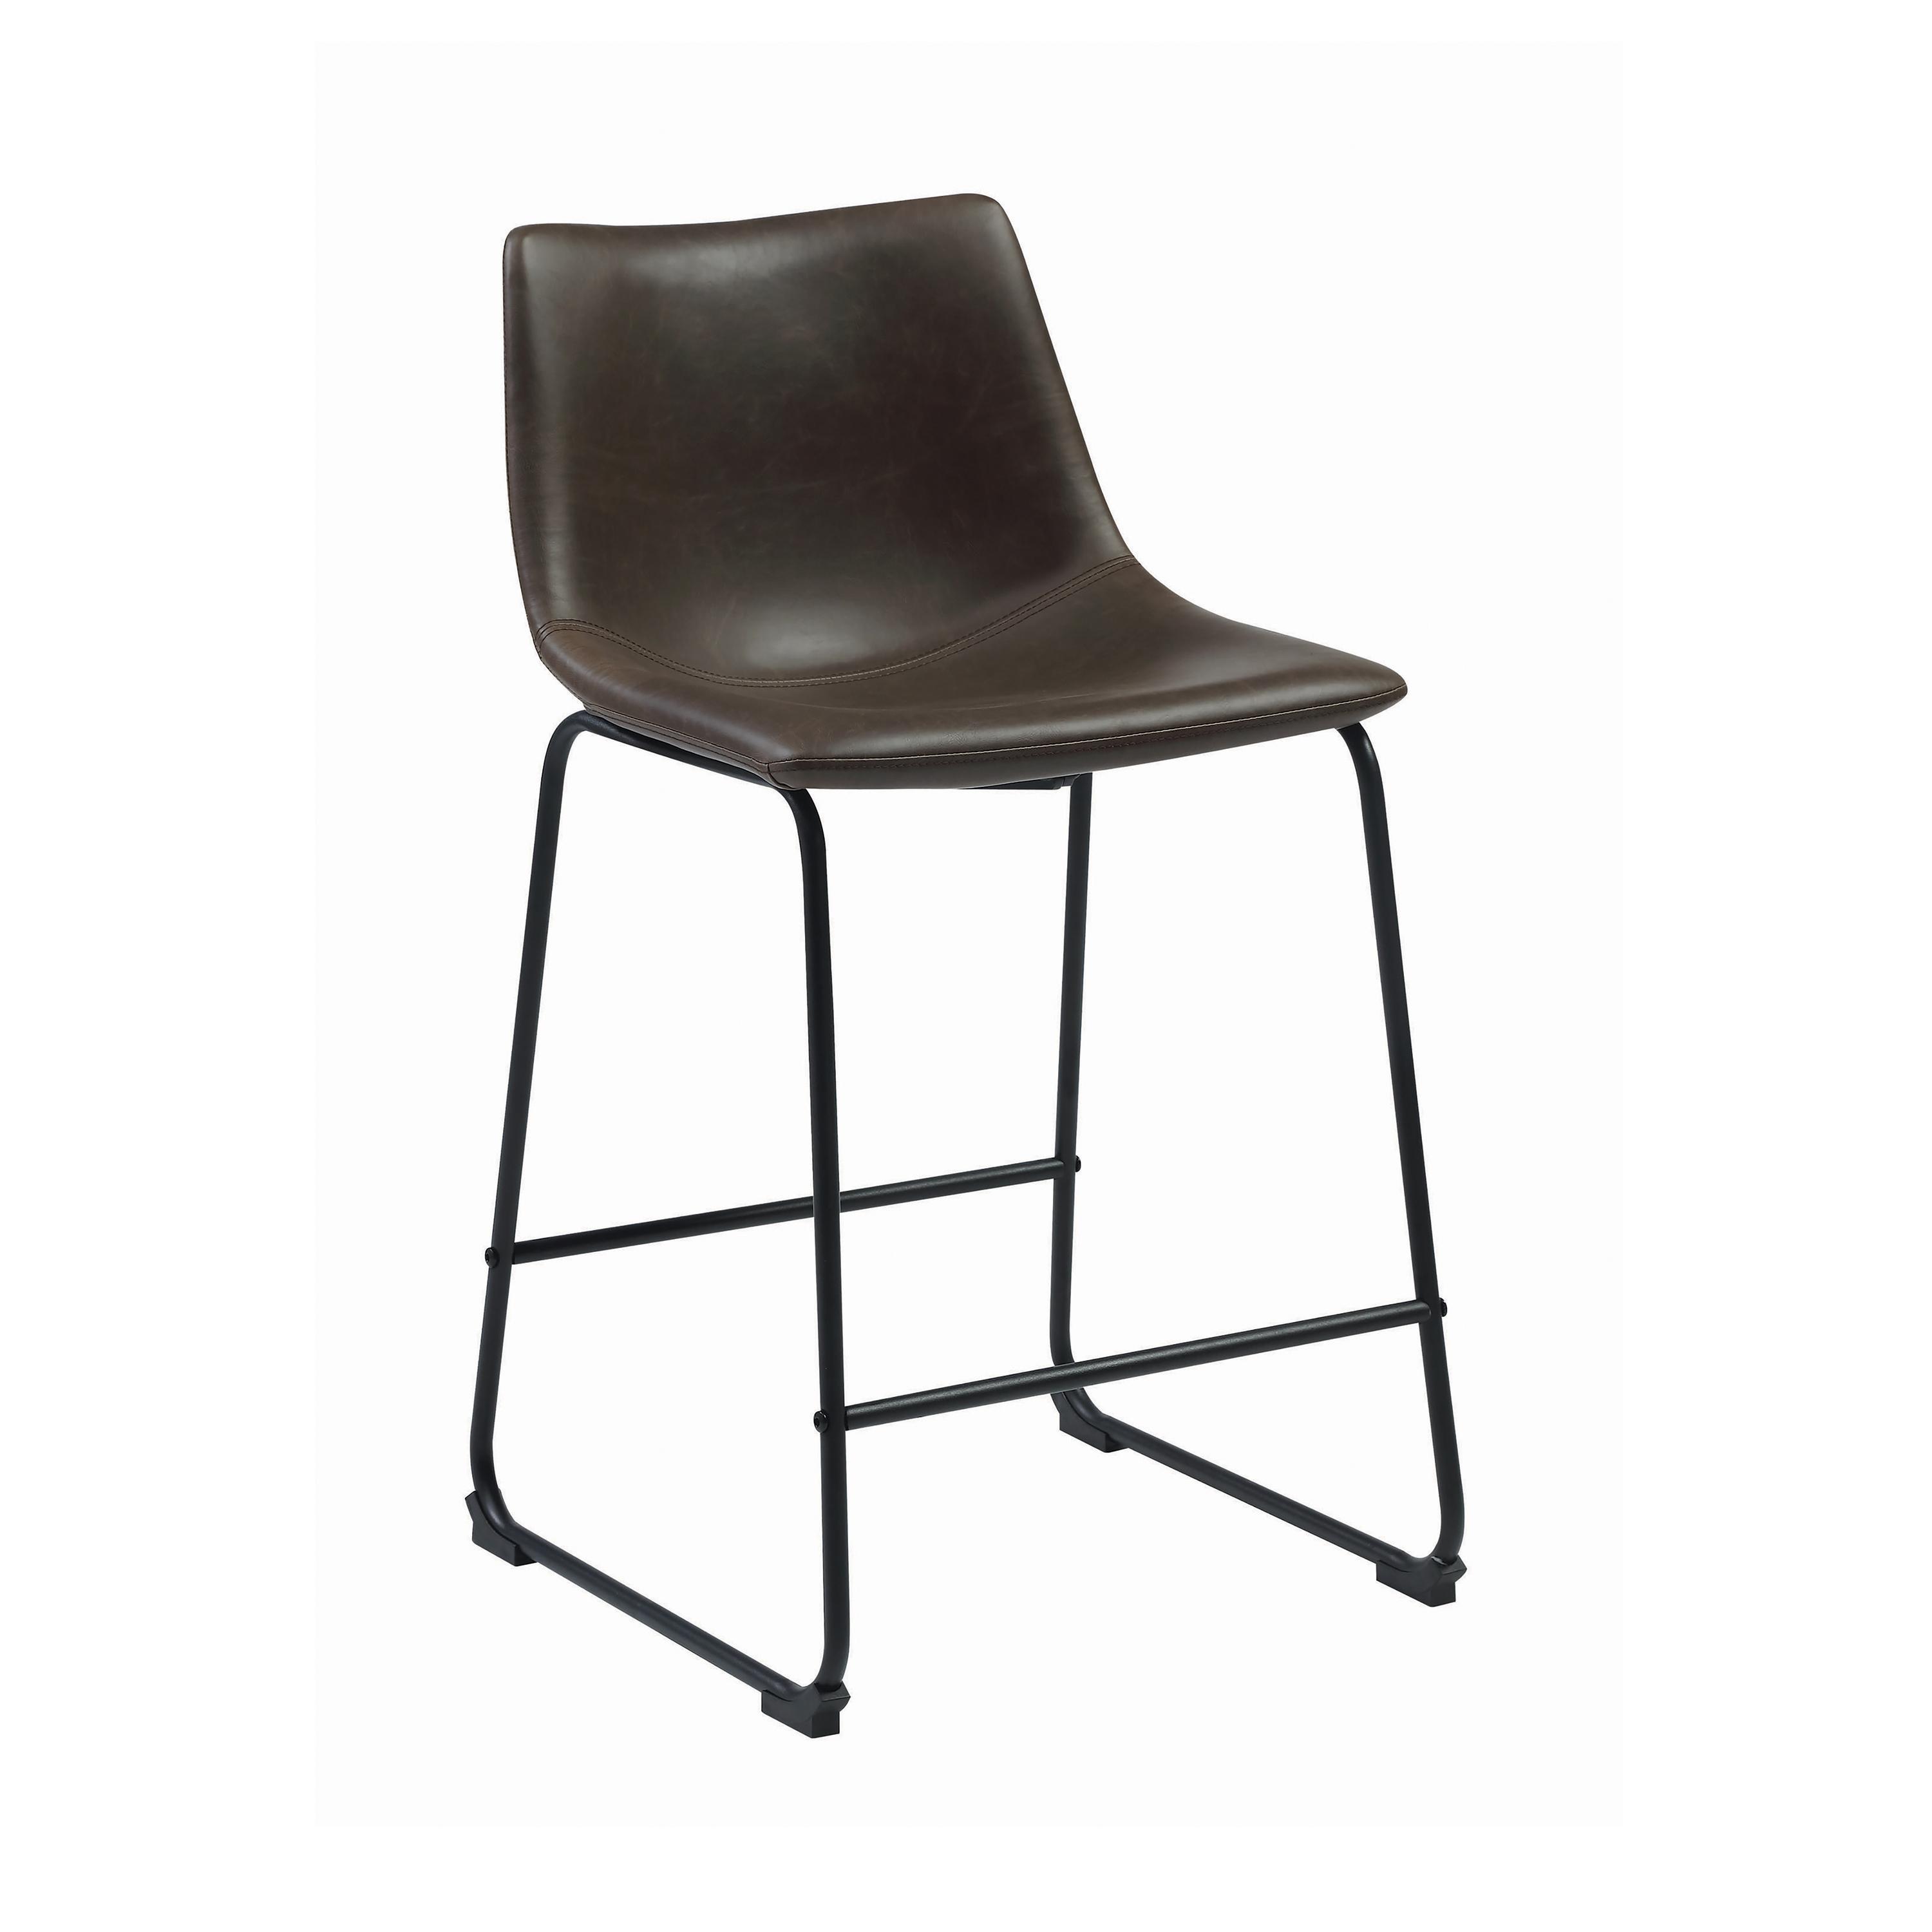 Transitional Counter Height Stool Set 102535 102535 in Brown, Black Leatherette